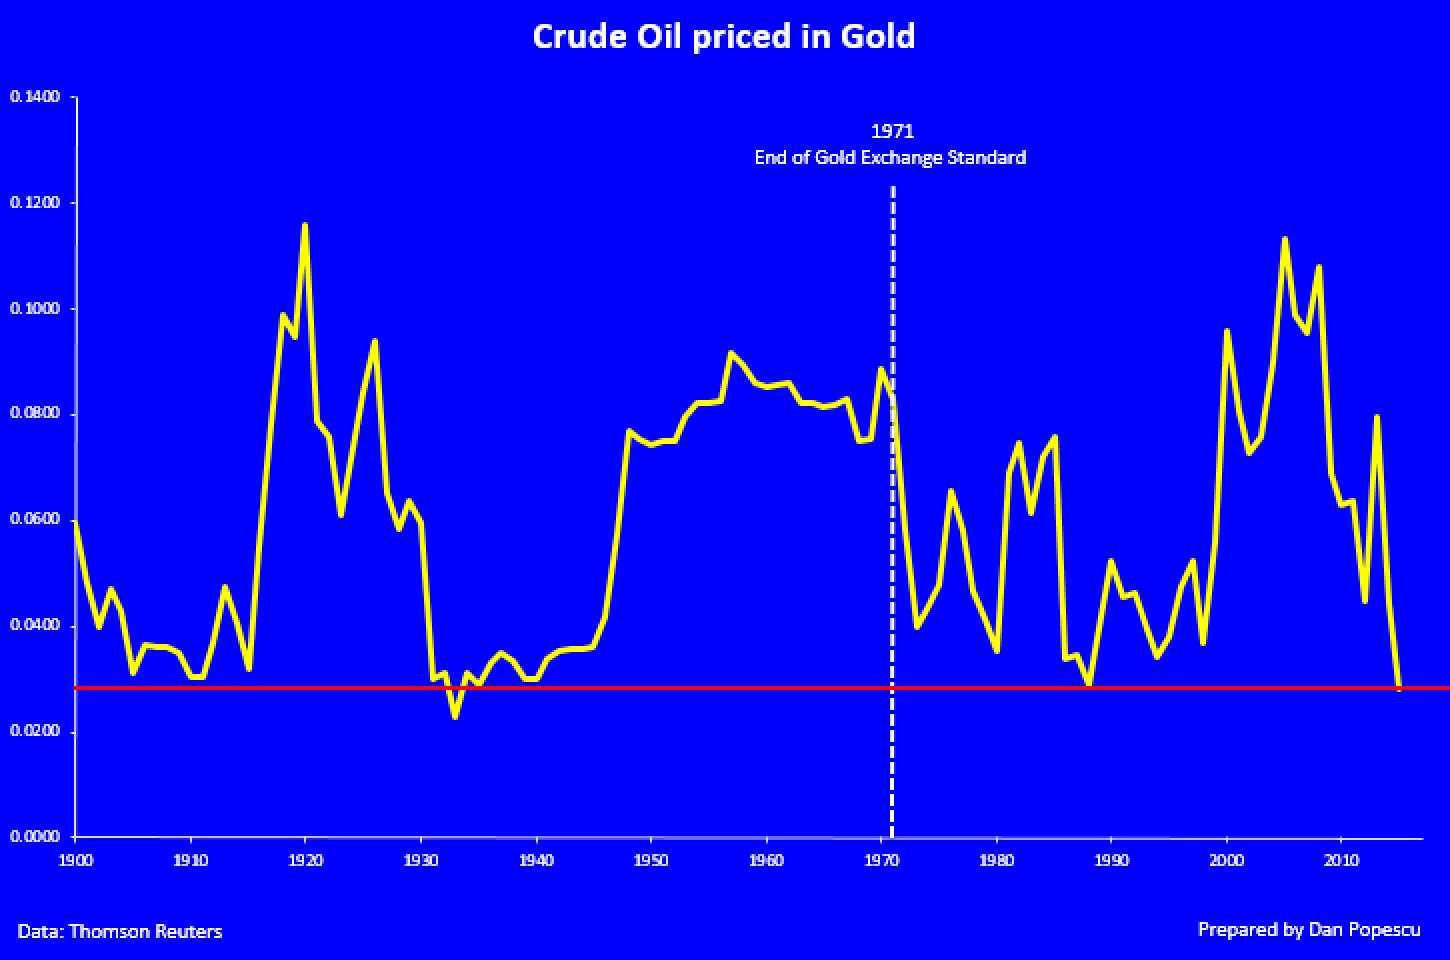 Crude Oil priced in gold